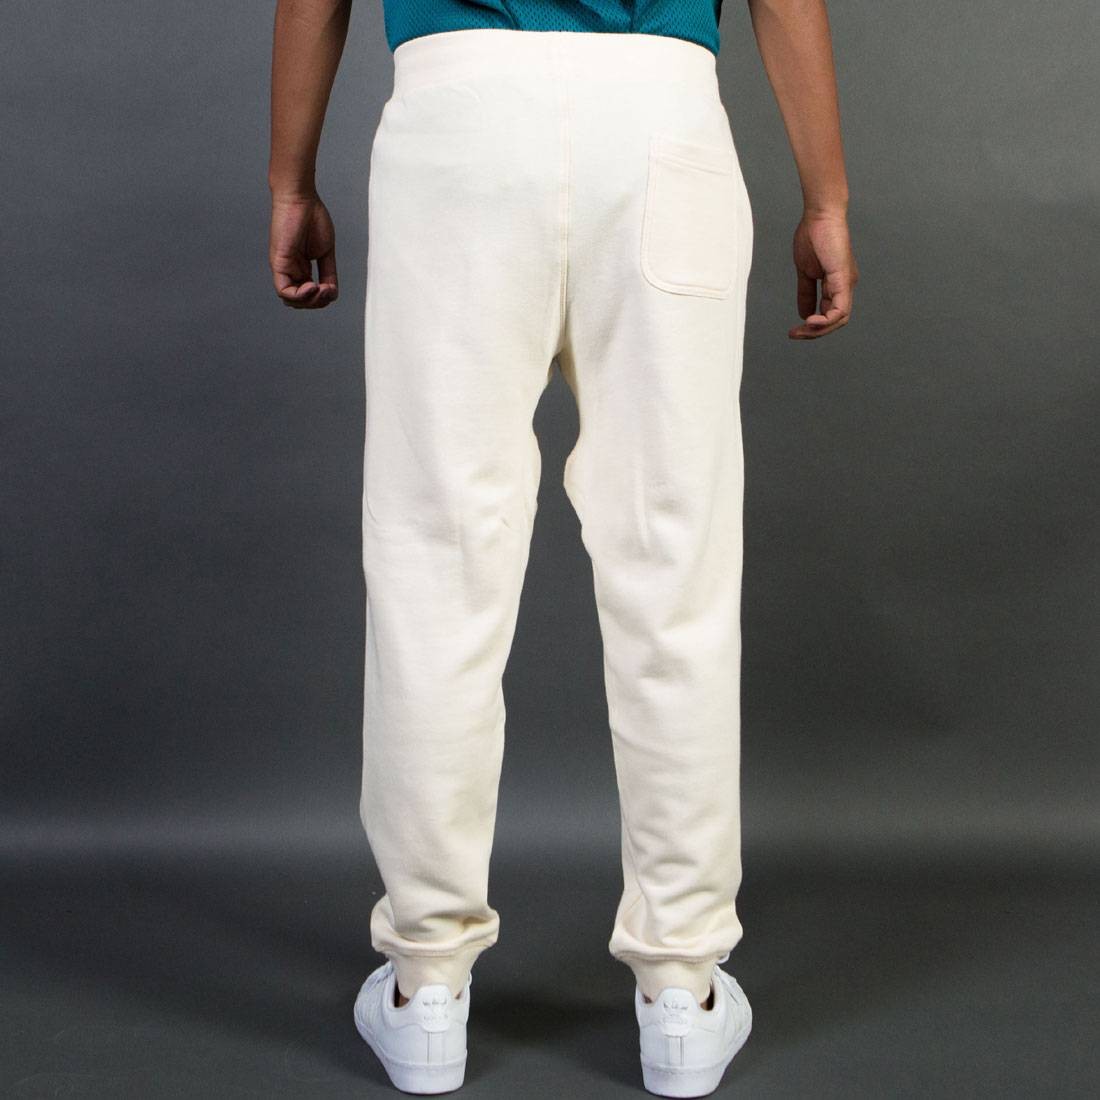 Undefeated Men Undefeated Sweatpants white offwhite